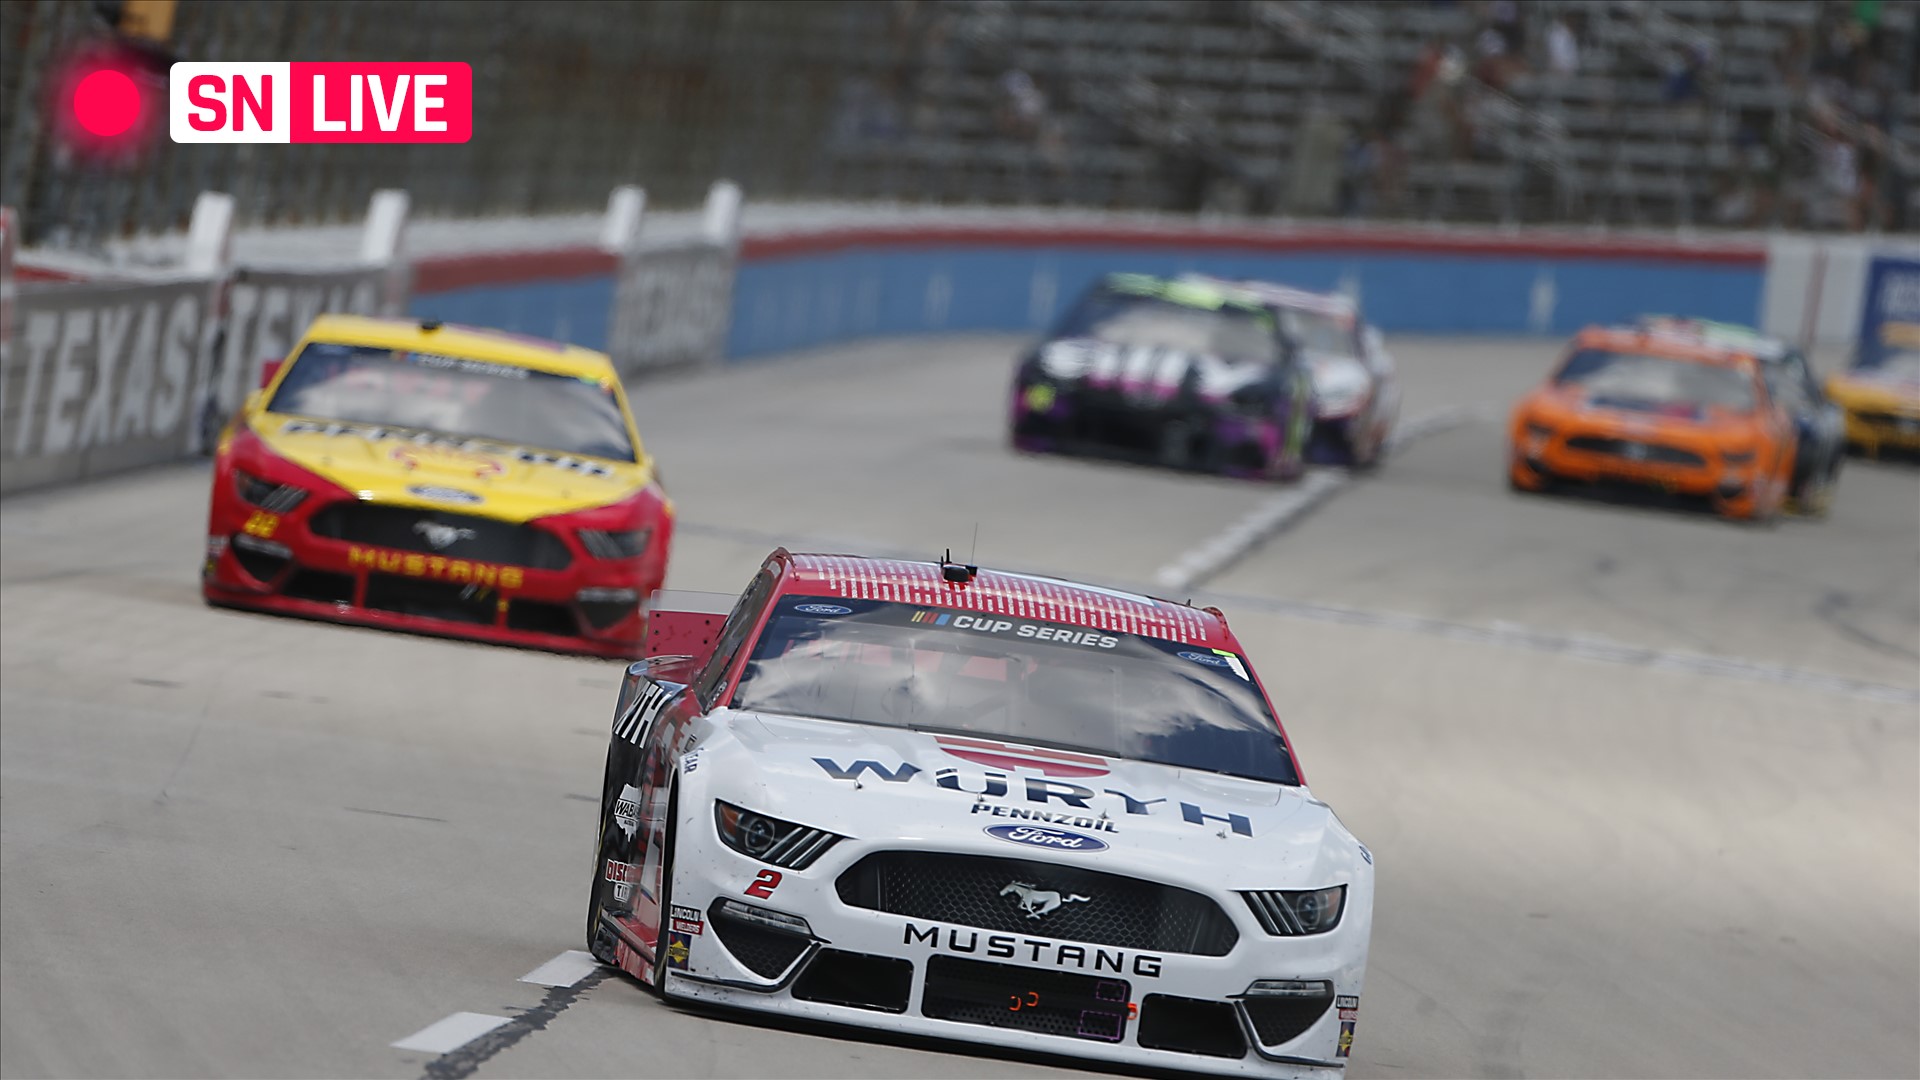 NASCAR at Texas Live Race Updates, Results and Autotrader EchoPark Automotive 500 Highlights